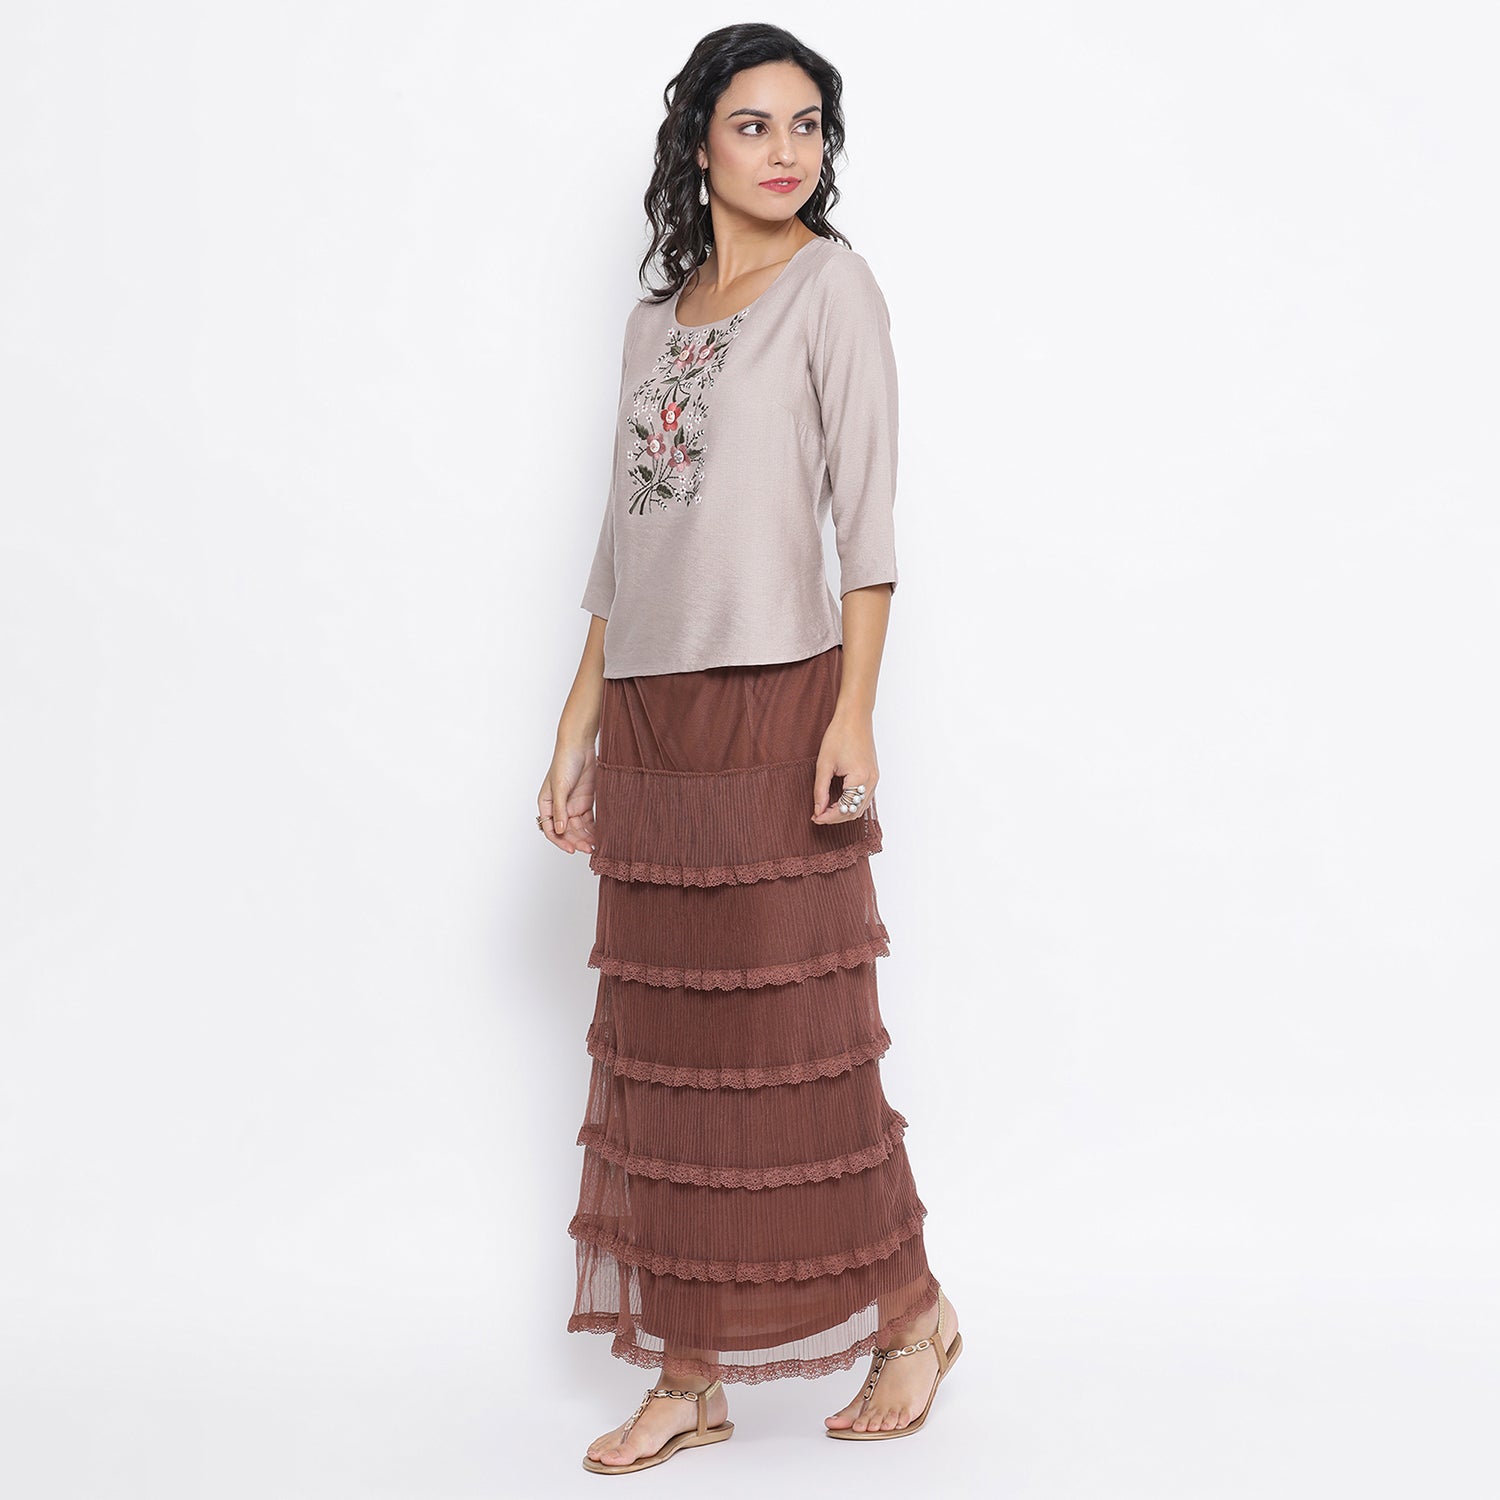 Brown Net Frill Skirt With Lace